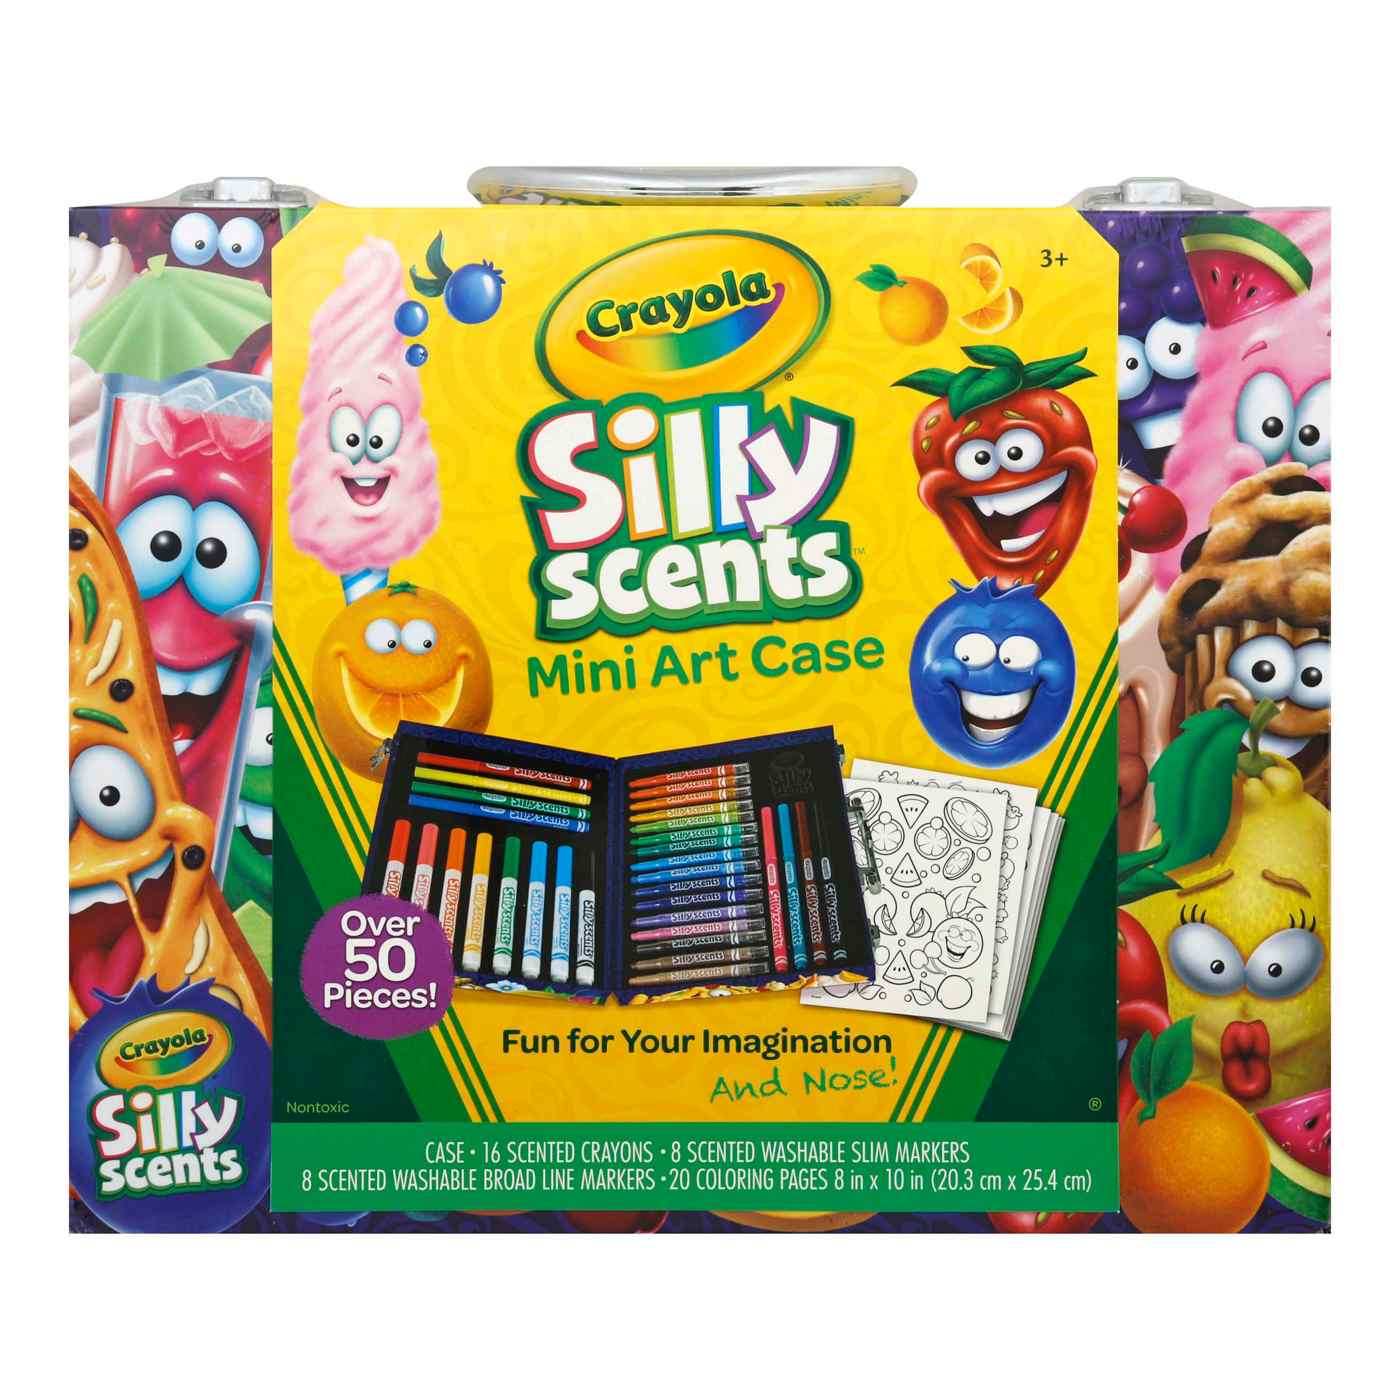 Crayola Silly Scents Mini Art Case; image 1 of 2